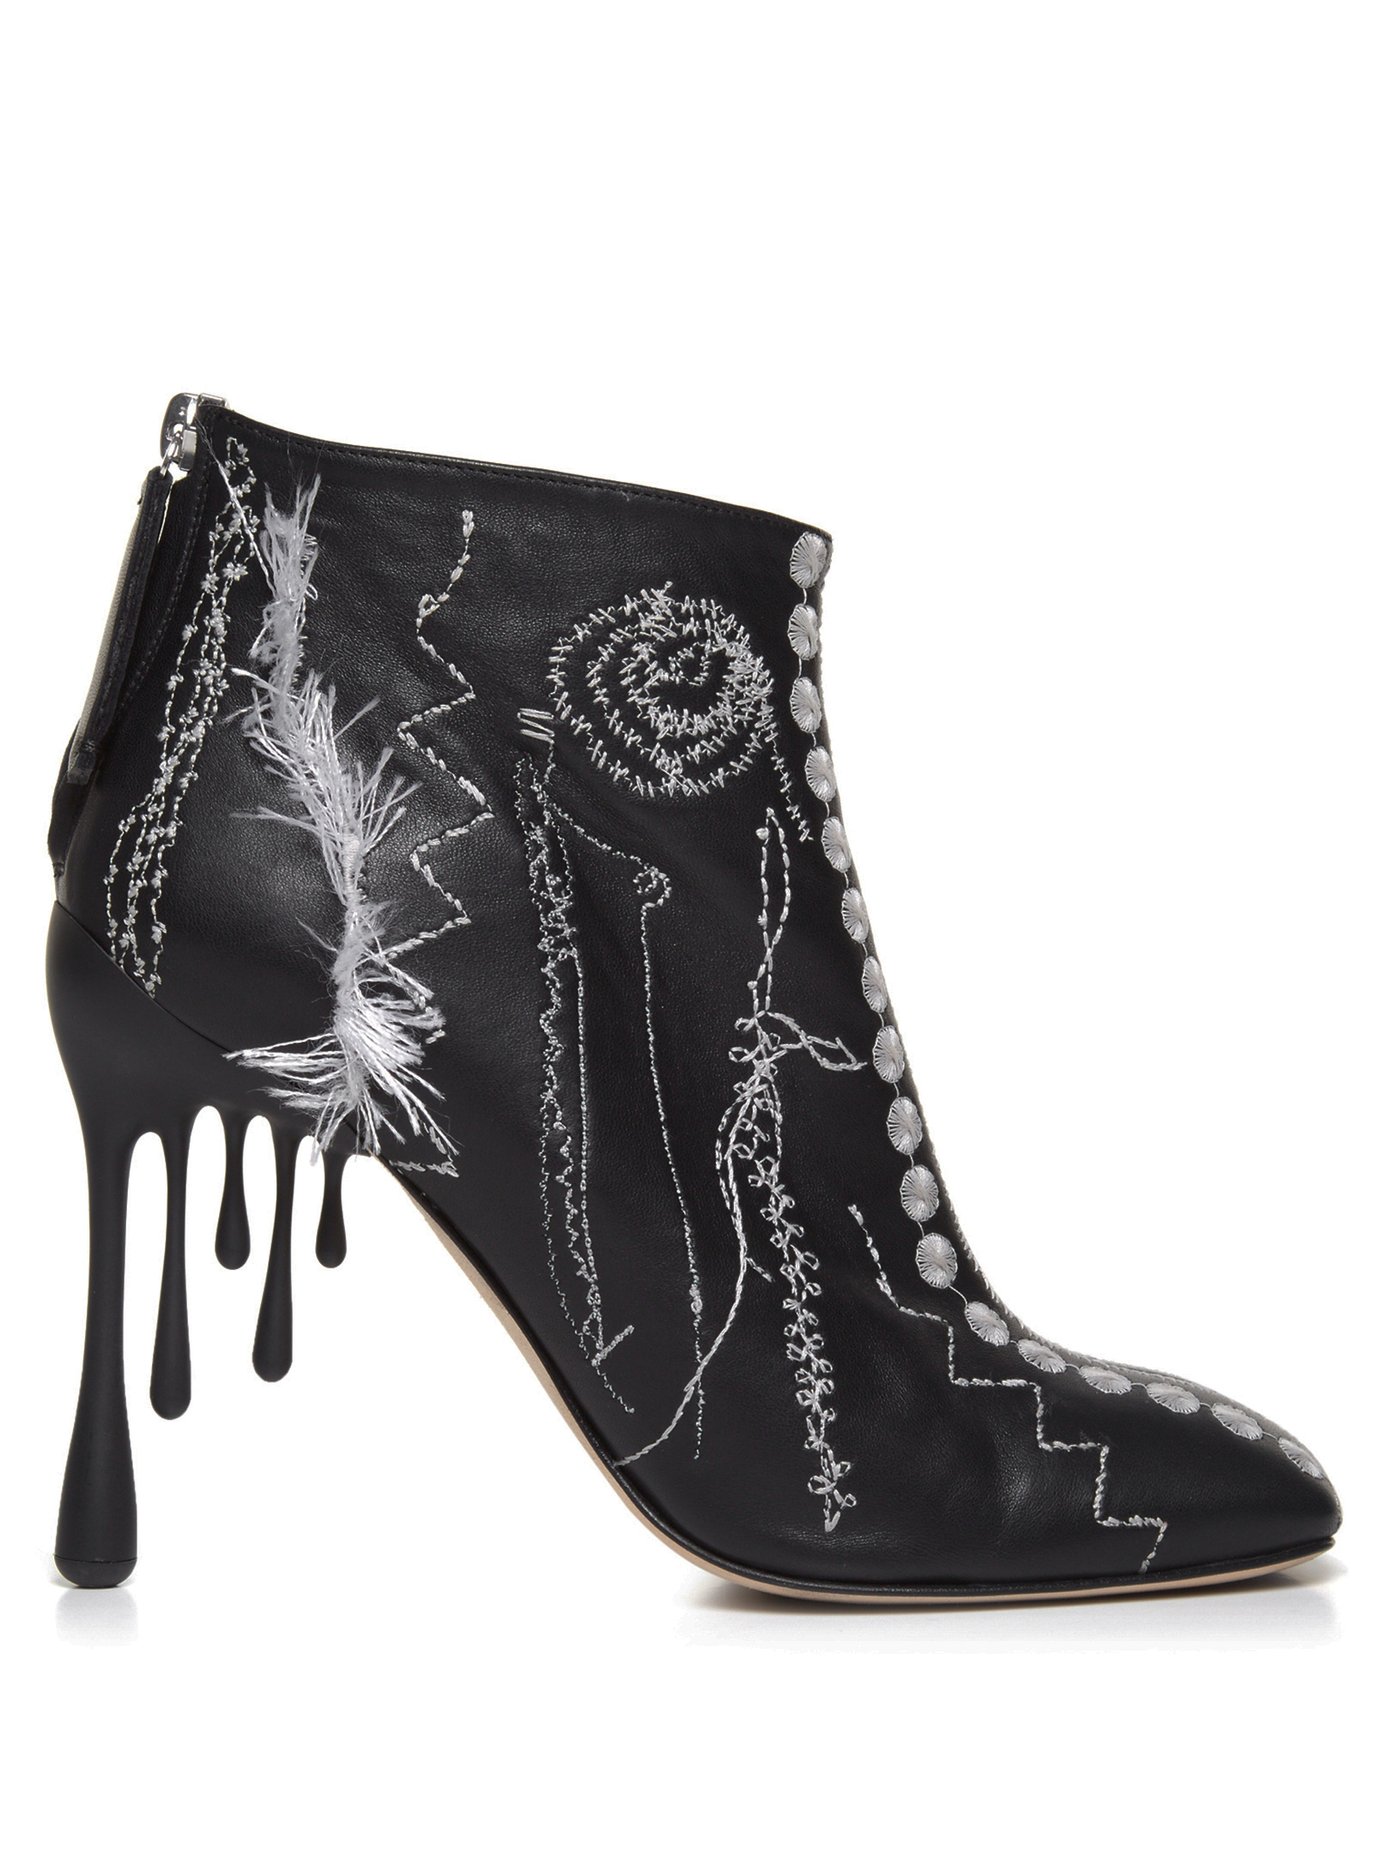 christopher kane boots